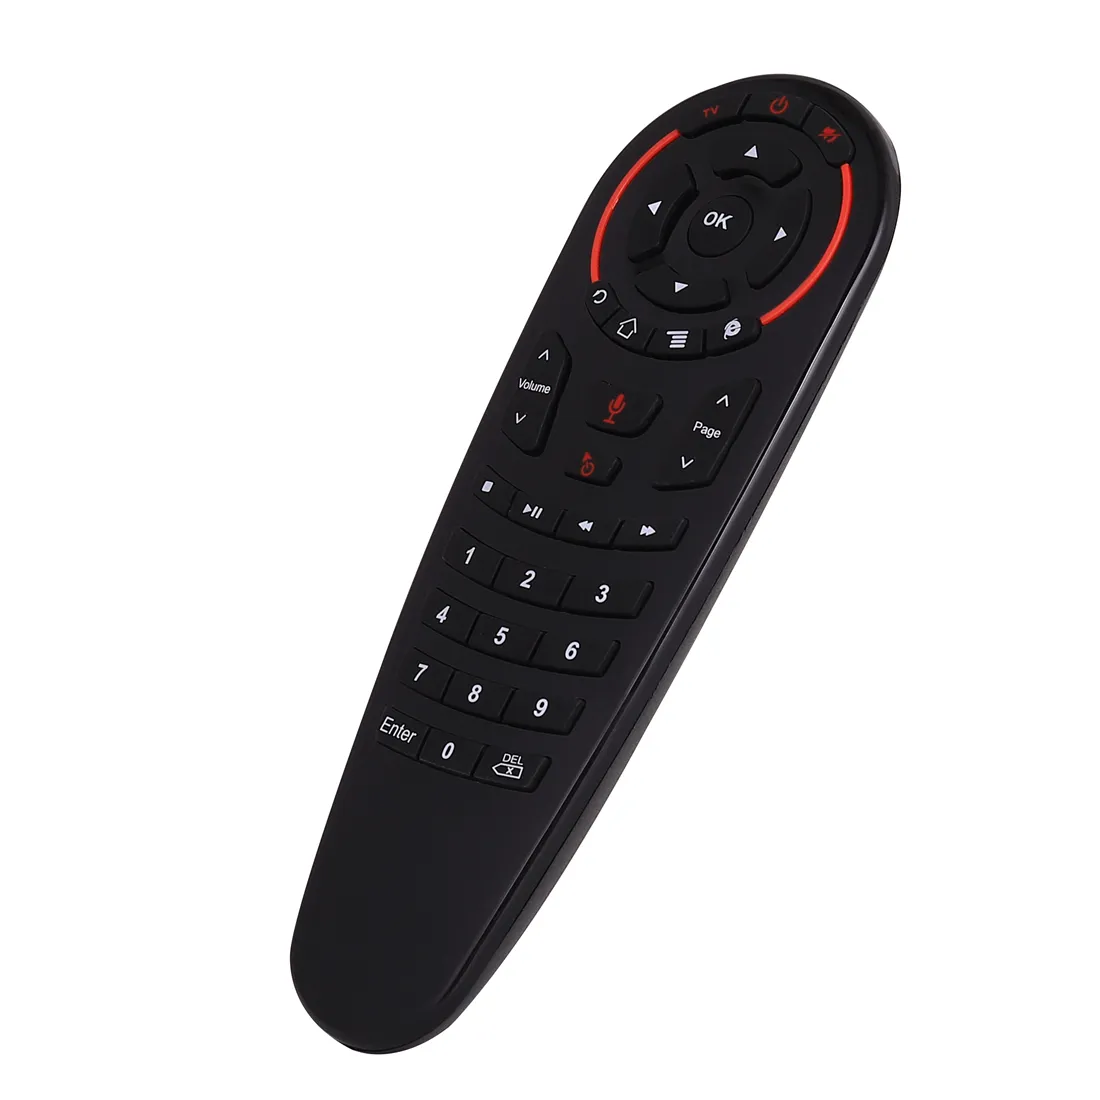 G30 Voice Air Mouse 33 keys IR learning 2.4G Wireless Keyboard g30s Voice Universal Remote Control Gyro for Android tv box PC